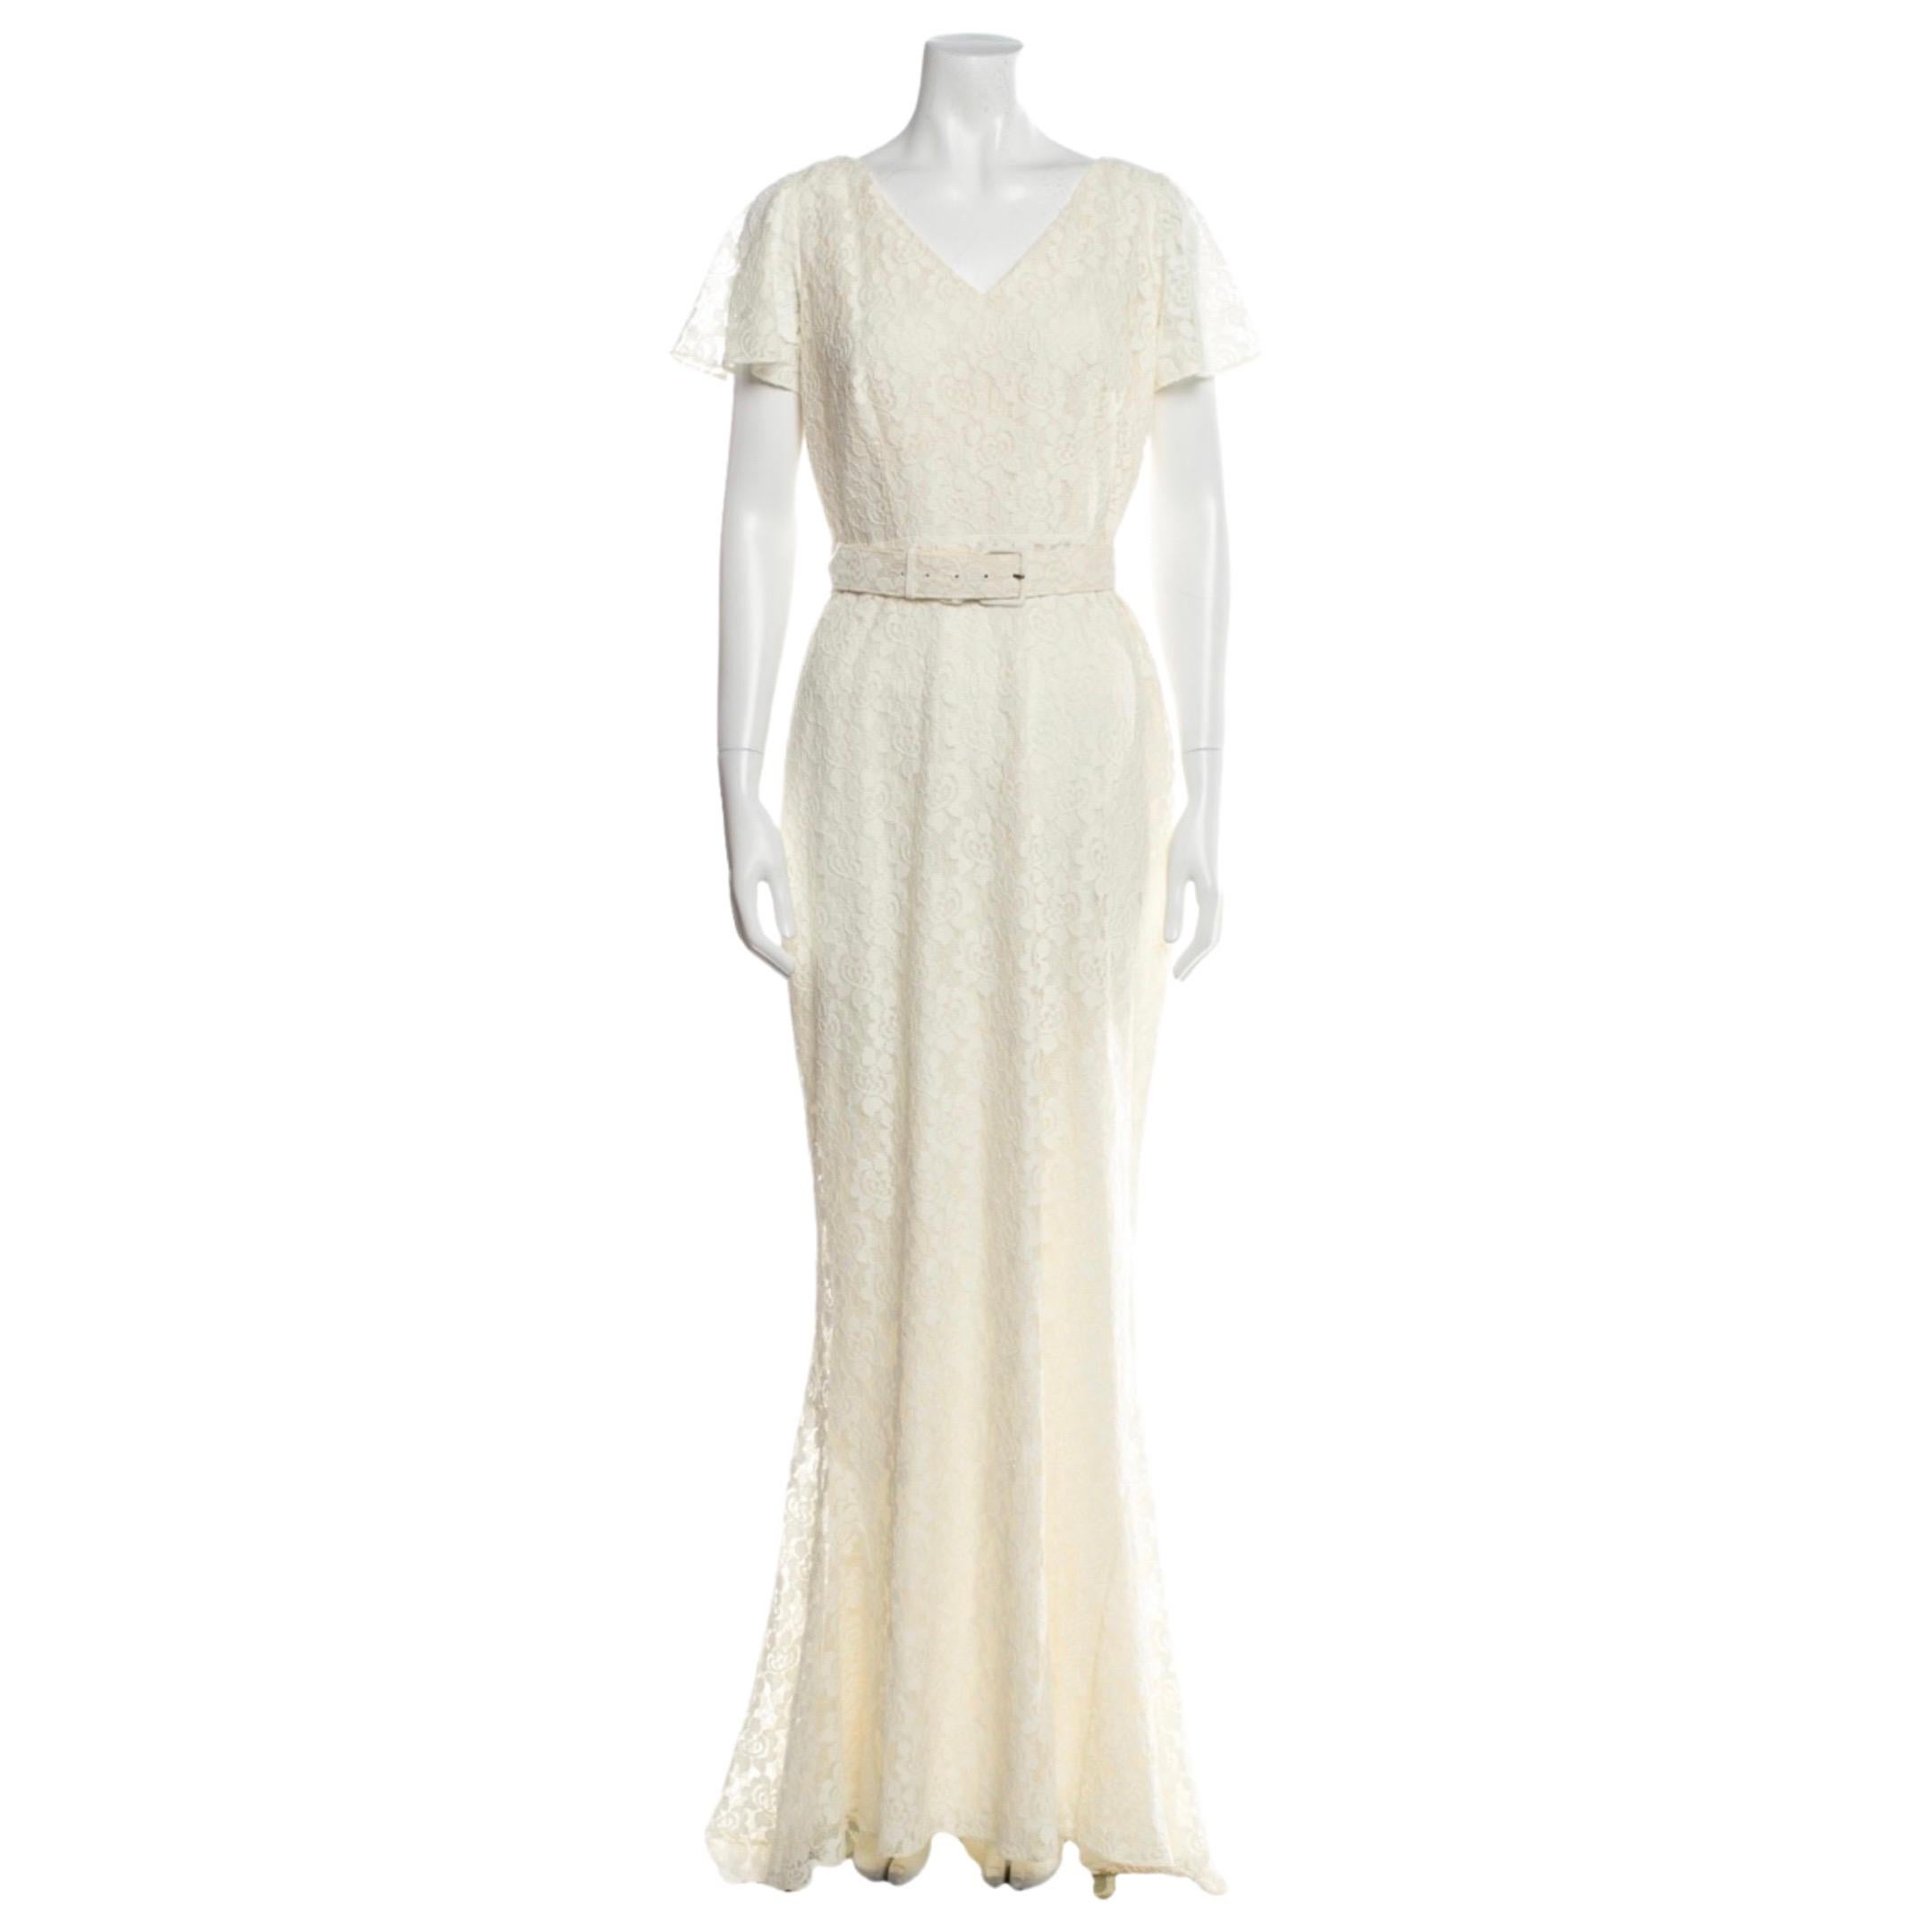 Rachel Zoe Lace Wedding Gown 

This belted gown is the stuff dreams are made of. This classic look is always luxurious in that it commands quite a presence, Rather, it simply means relying on immaculate tailoring, sleek necklines, and rich textures.